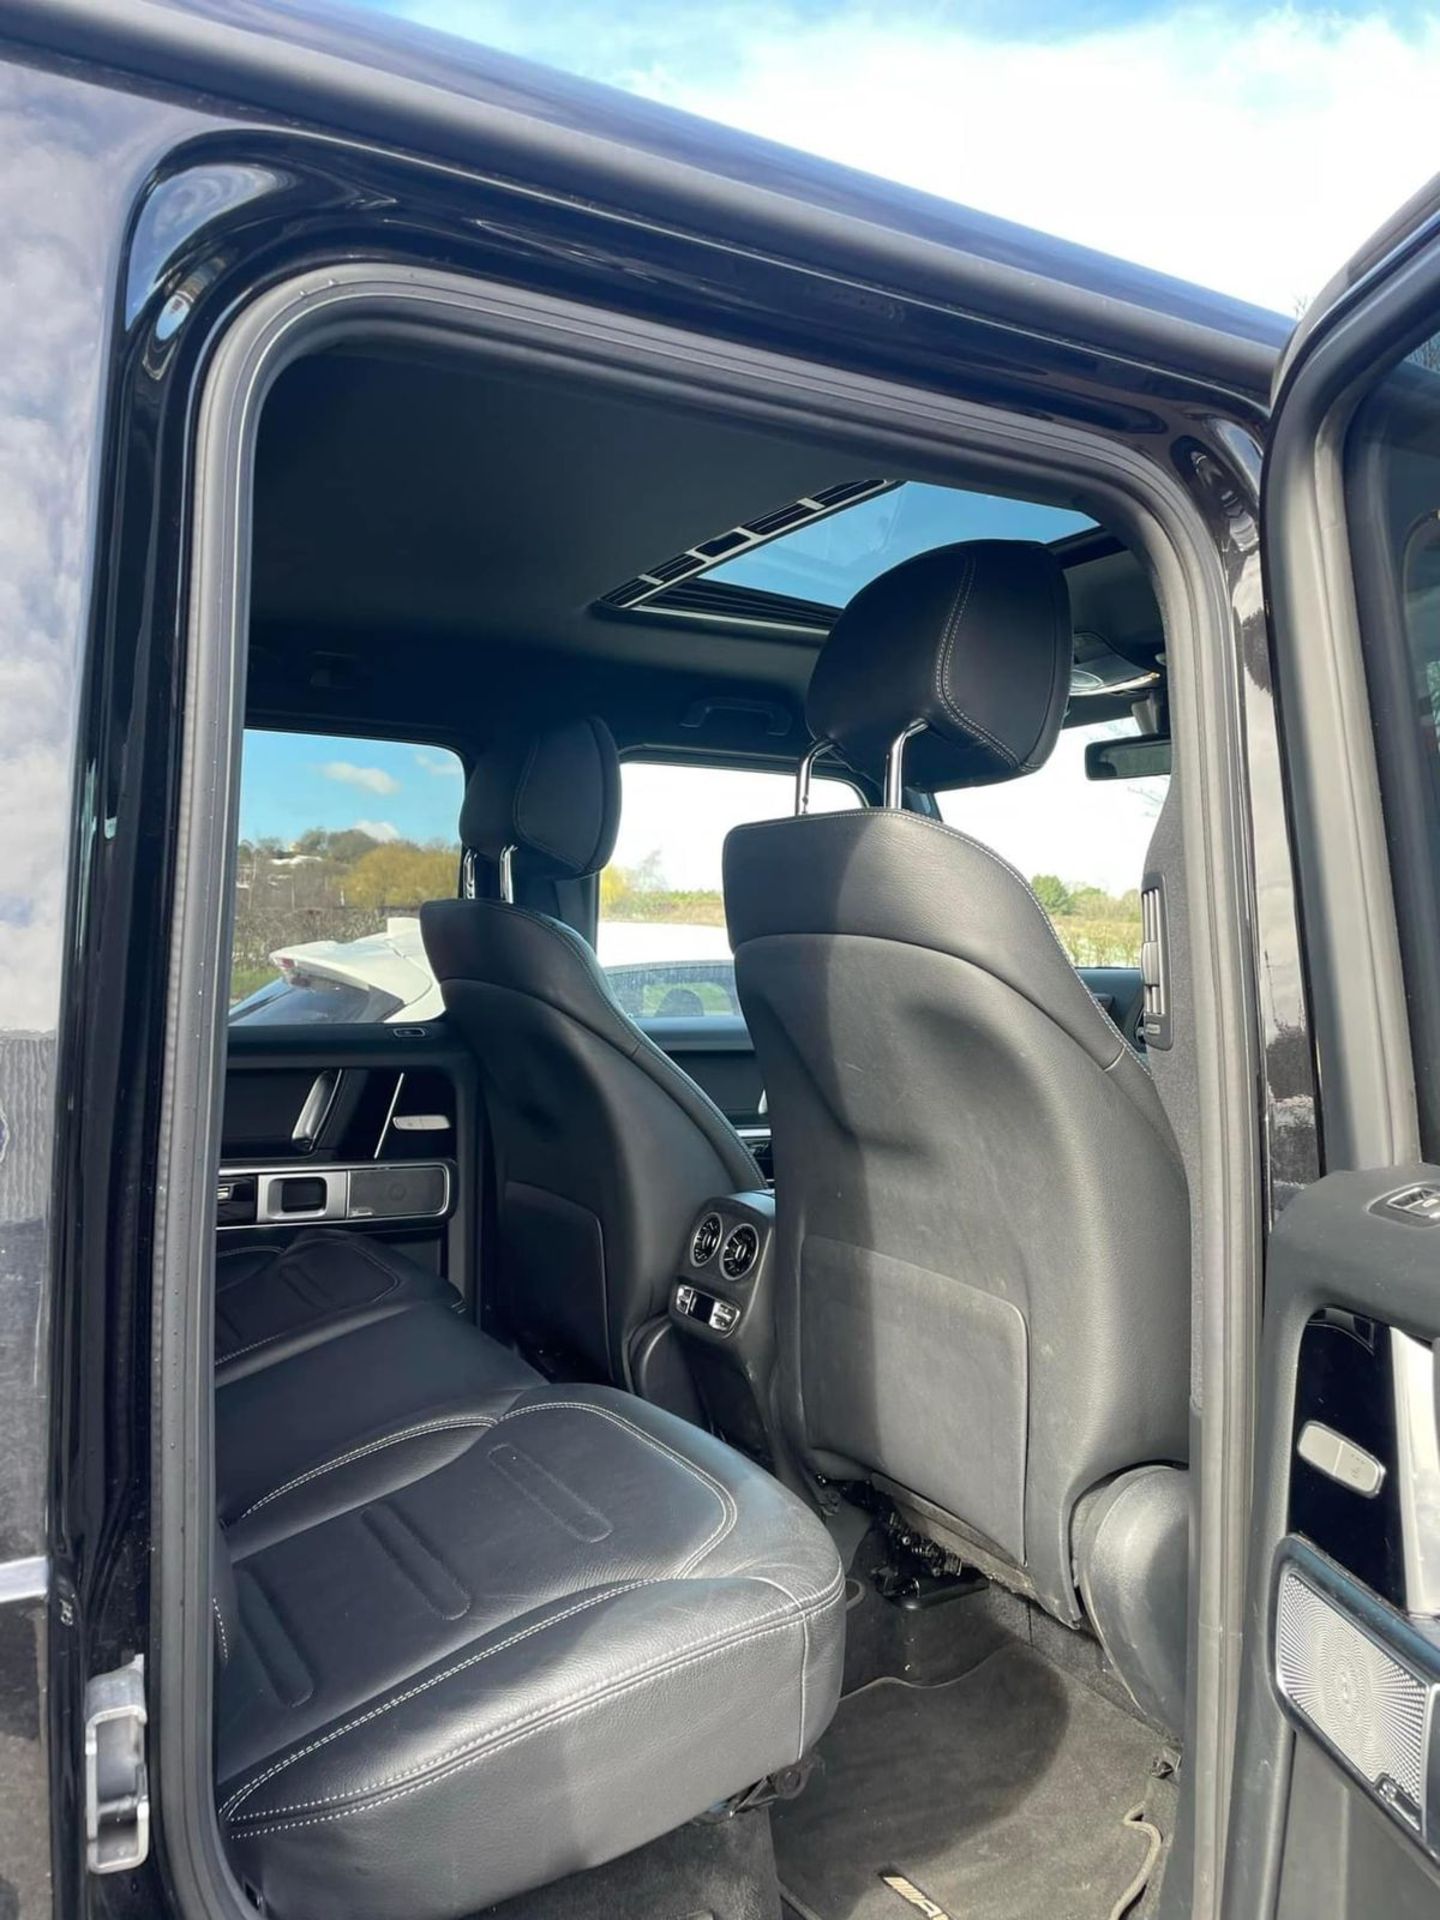 2019/19 REG MERCEDES-BENZ G350 AMG LINE PREMIUM D 4M AUTOMATIC RARE 7 SEAT, SHOWING 0 FORMER KEEPERS - Image 9 of 9